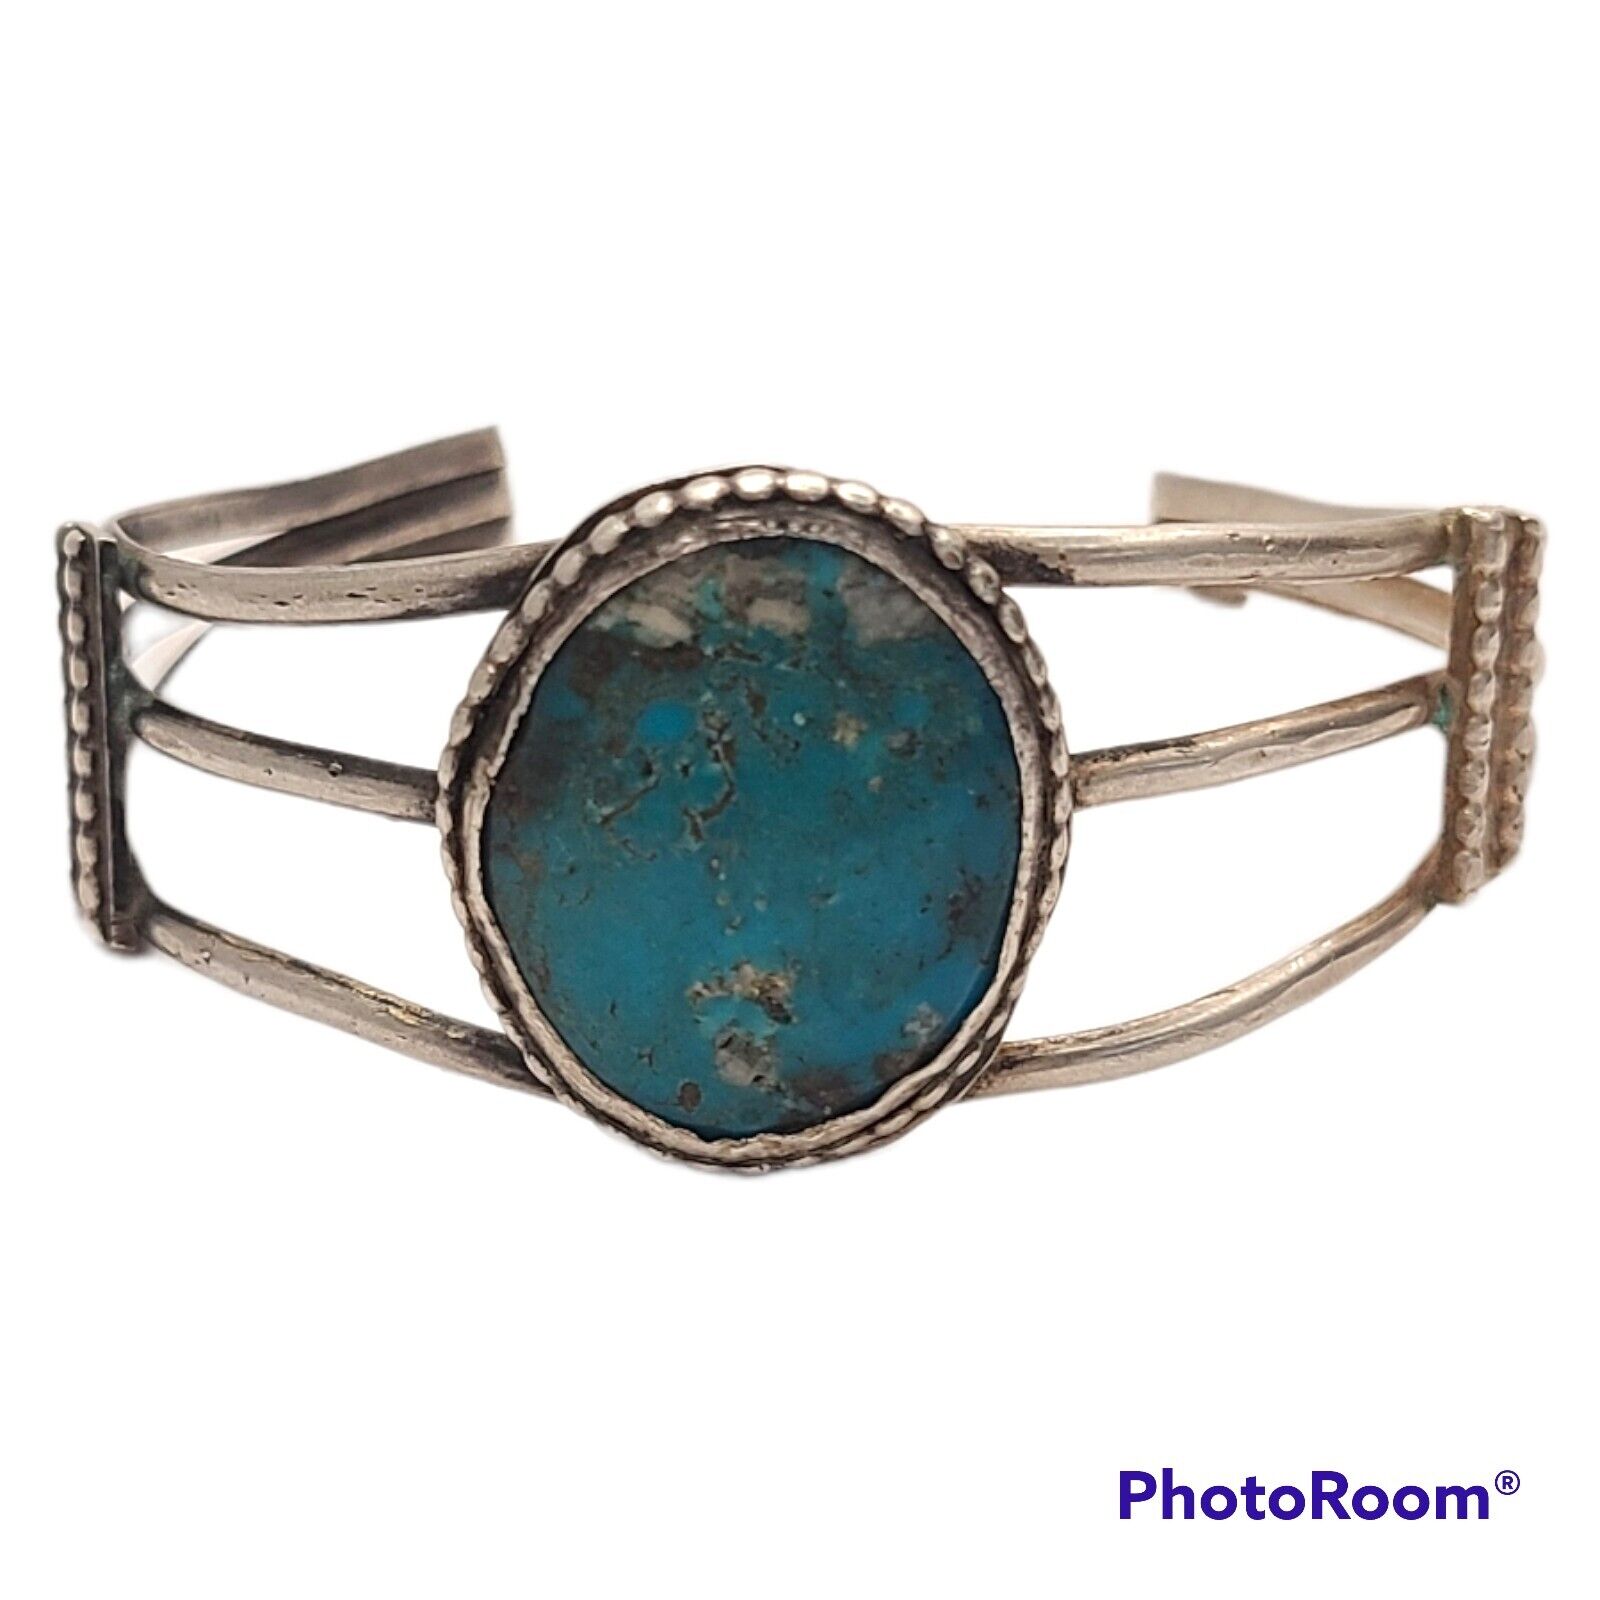 1970s Navajo Sterling Silver Matthew and Rosemary Lidase Turquoise Bracelet 